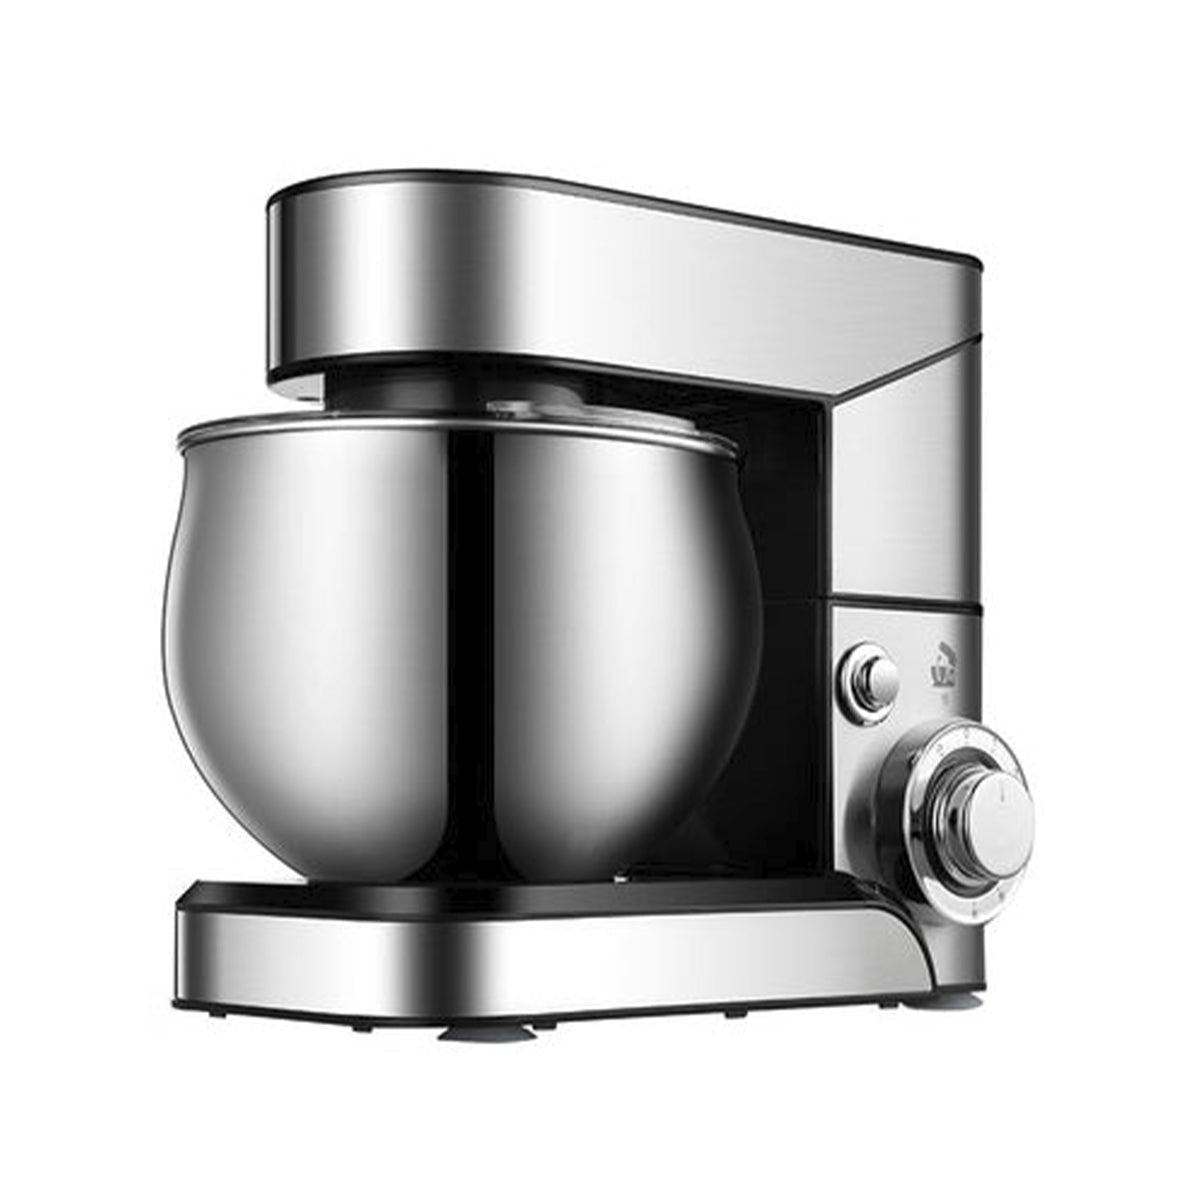 Stand Electric Food Mixer